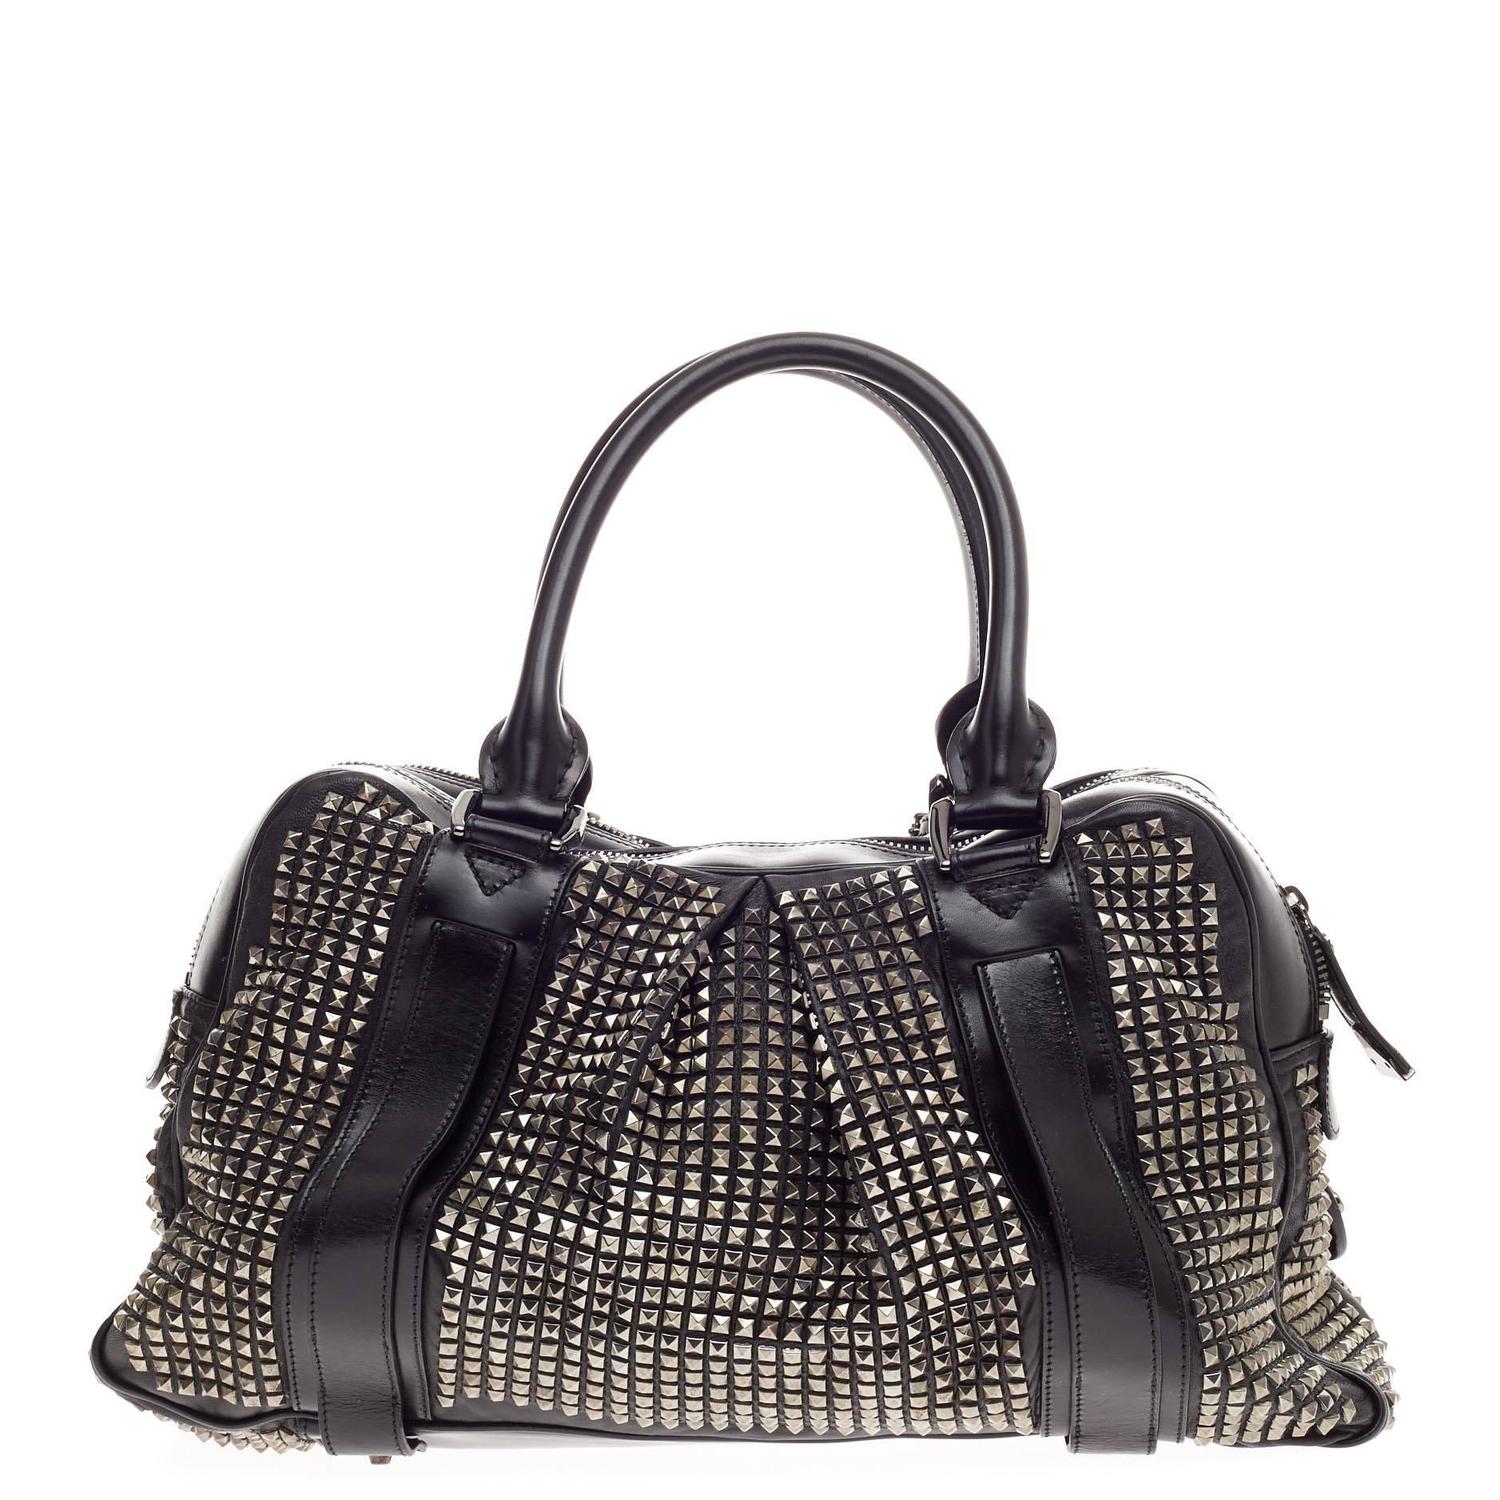 Burberry Knight Bag Studded Leather at 1stdibs